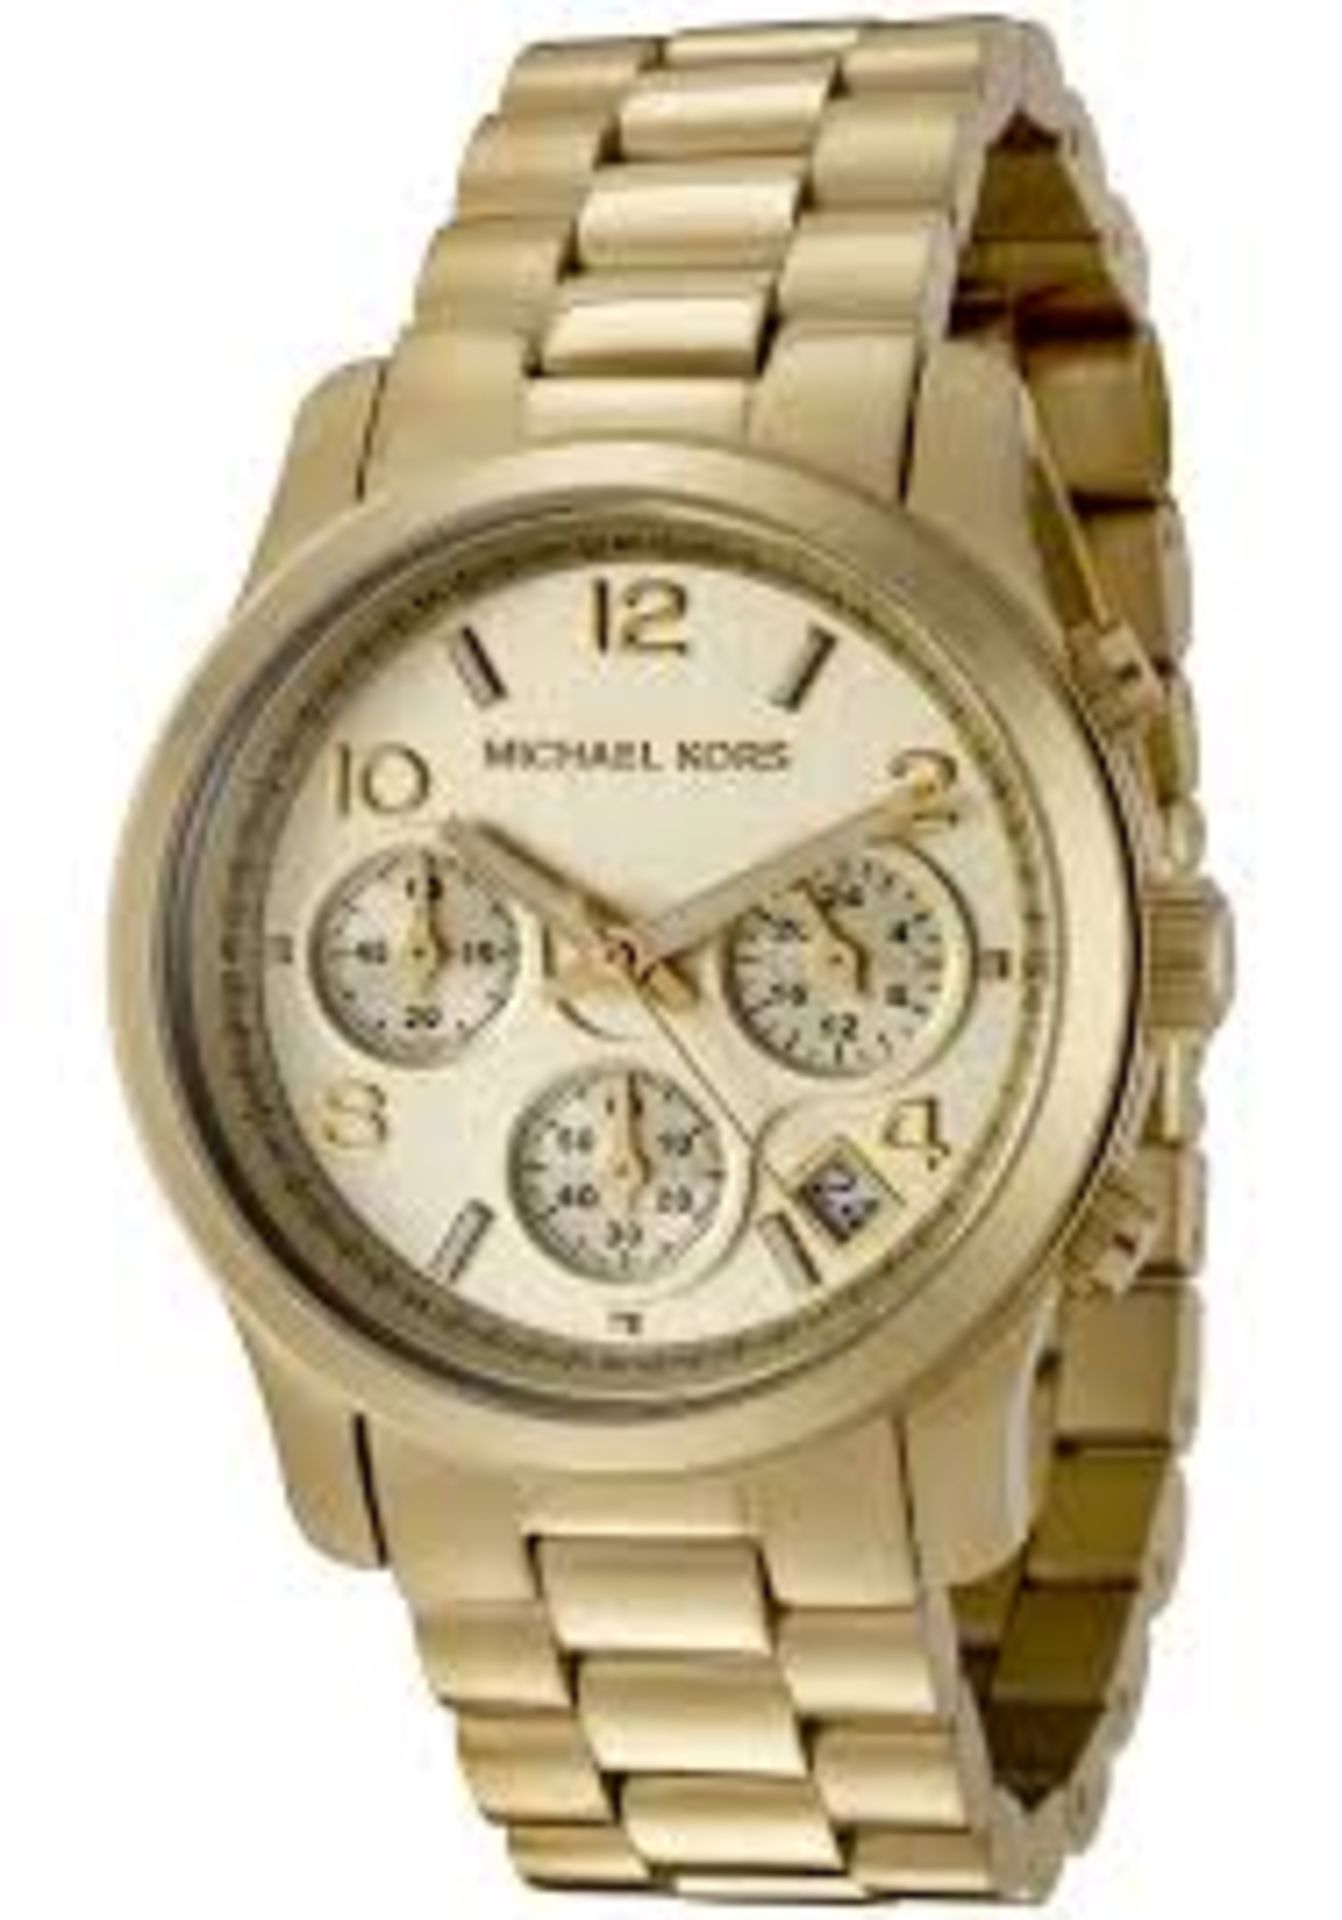 Stylish Michael Kors ladies watch, model number MK5055, stainless steel with yellow gold plating.